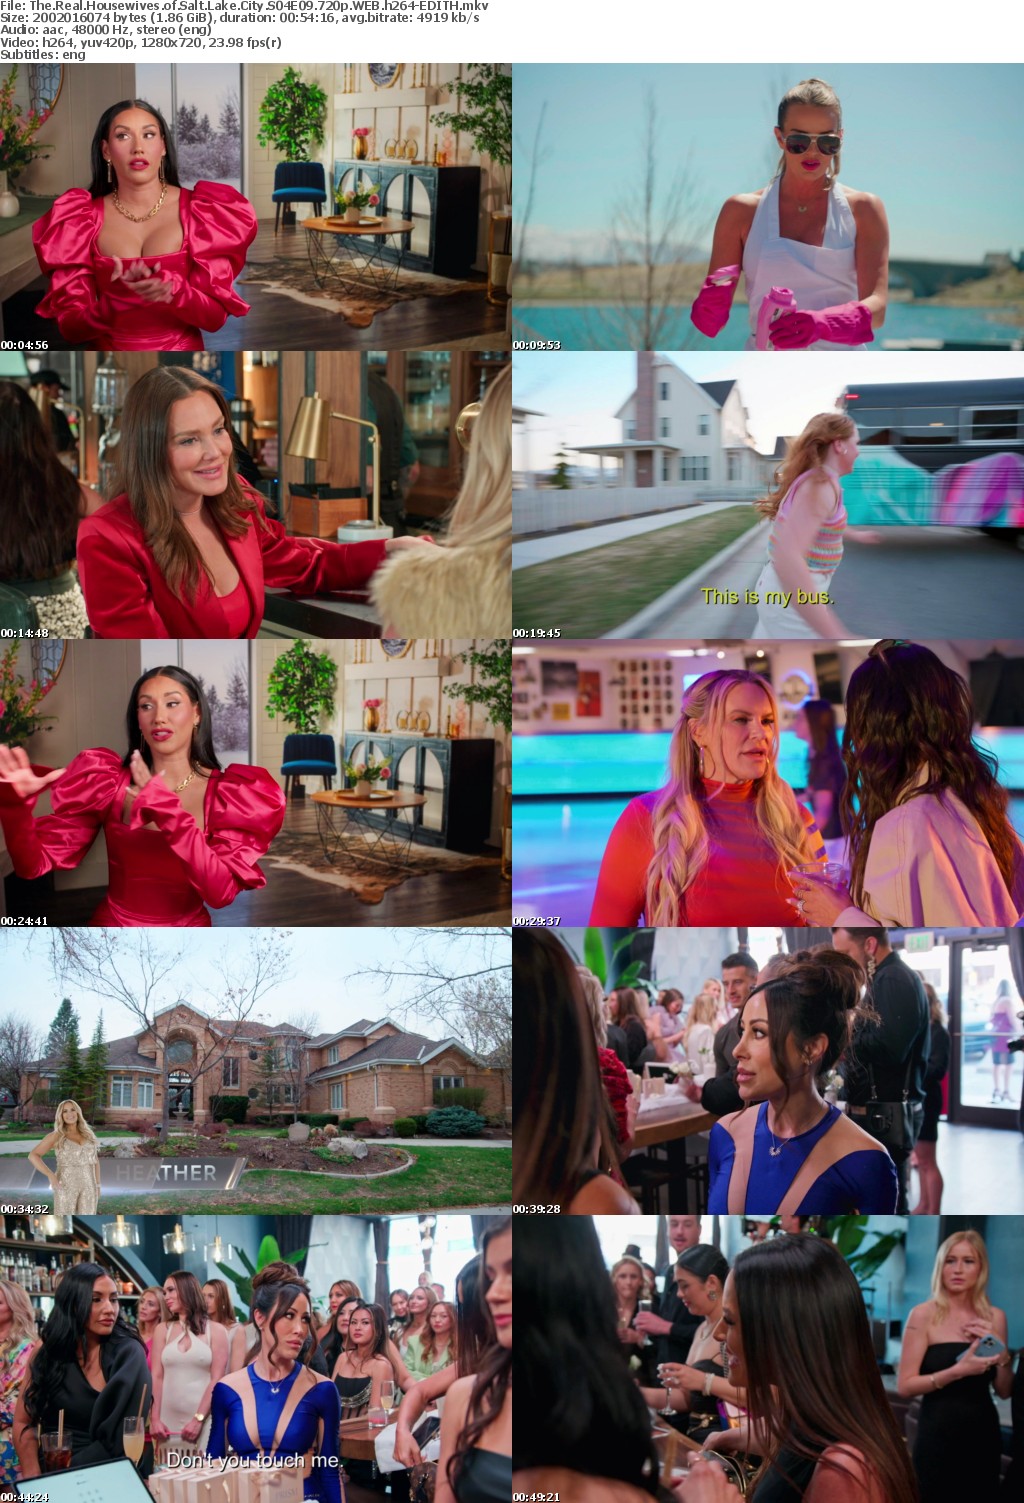 The Real Housewives of Salt Lake City S04E09 720p WEB h264-EDITH